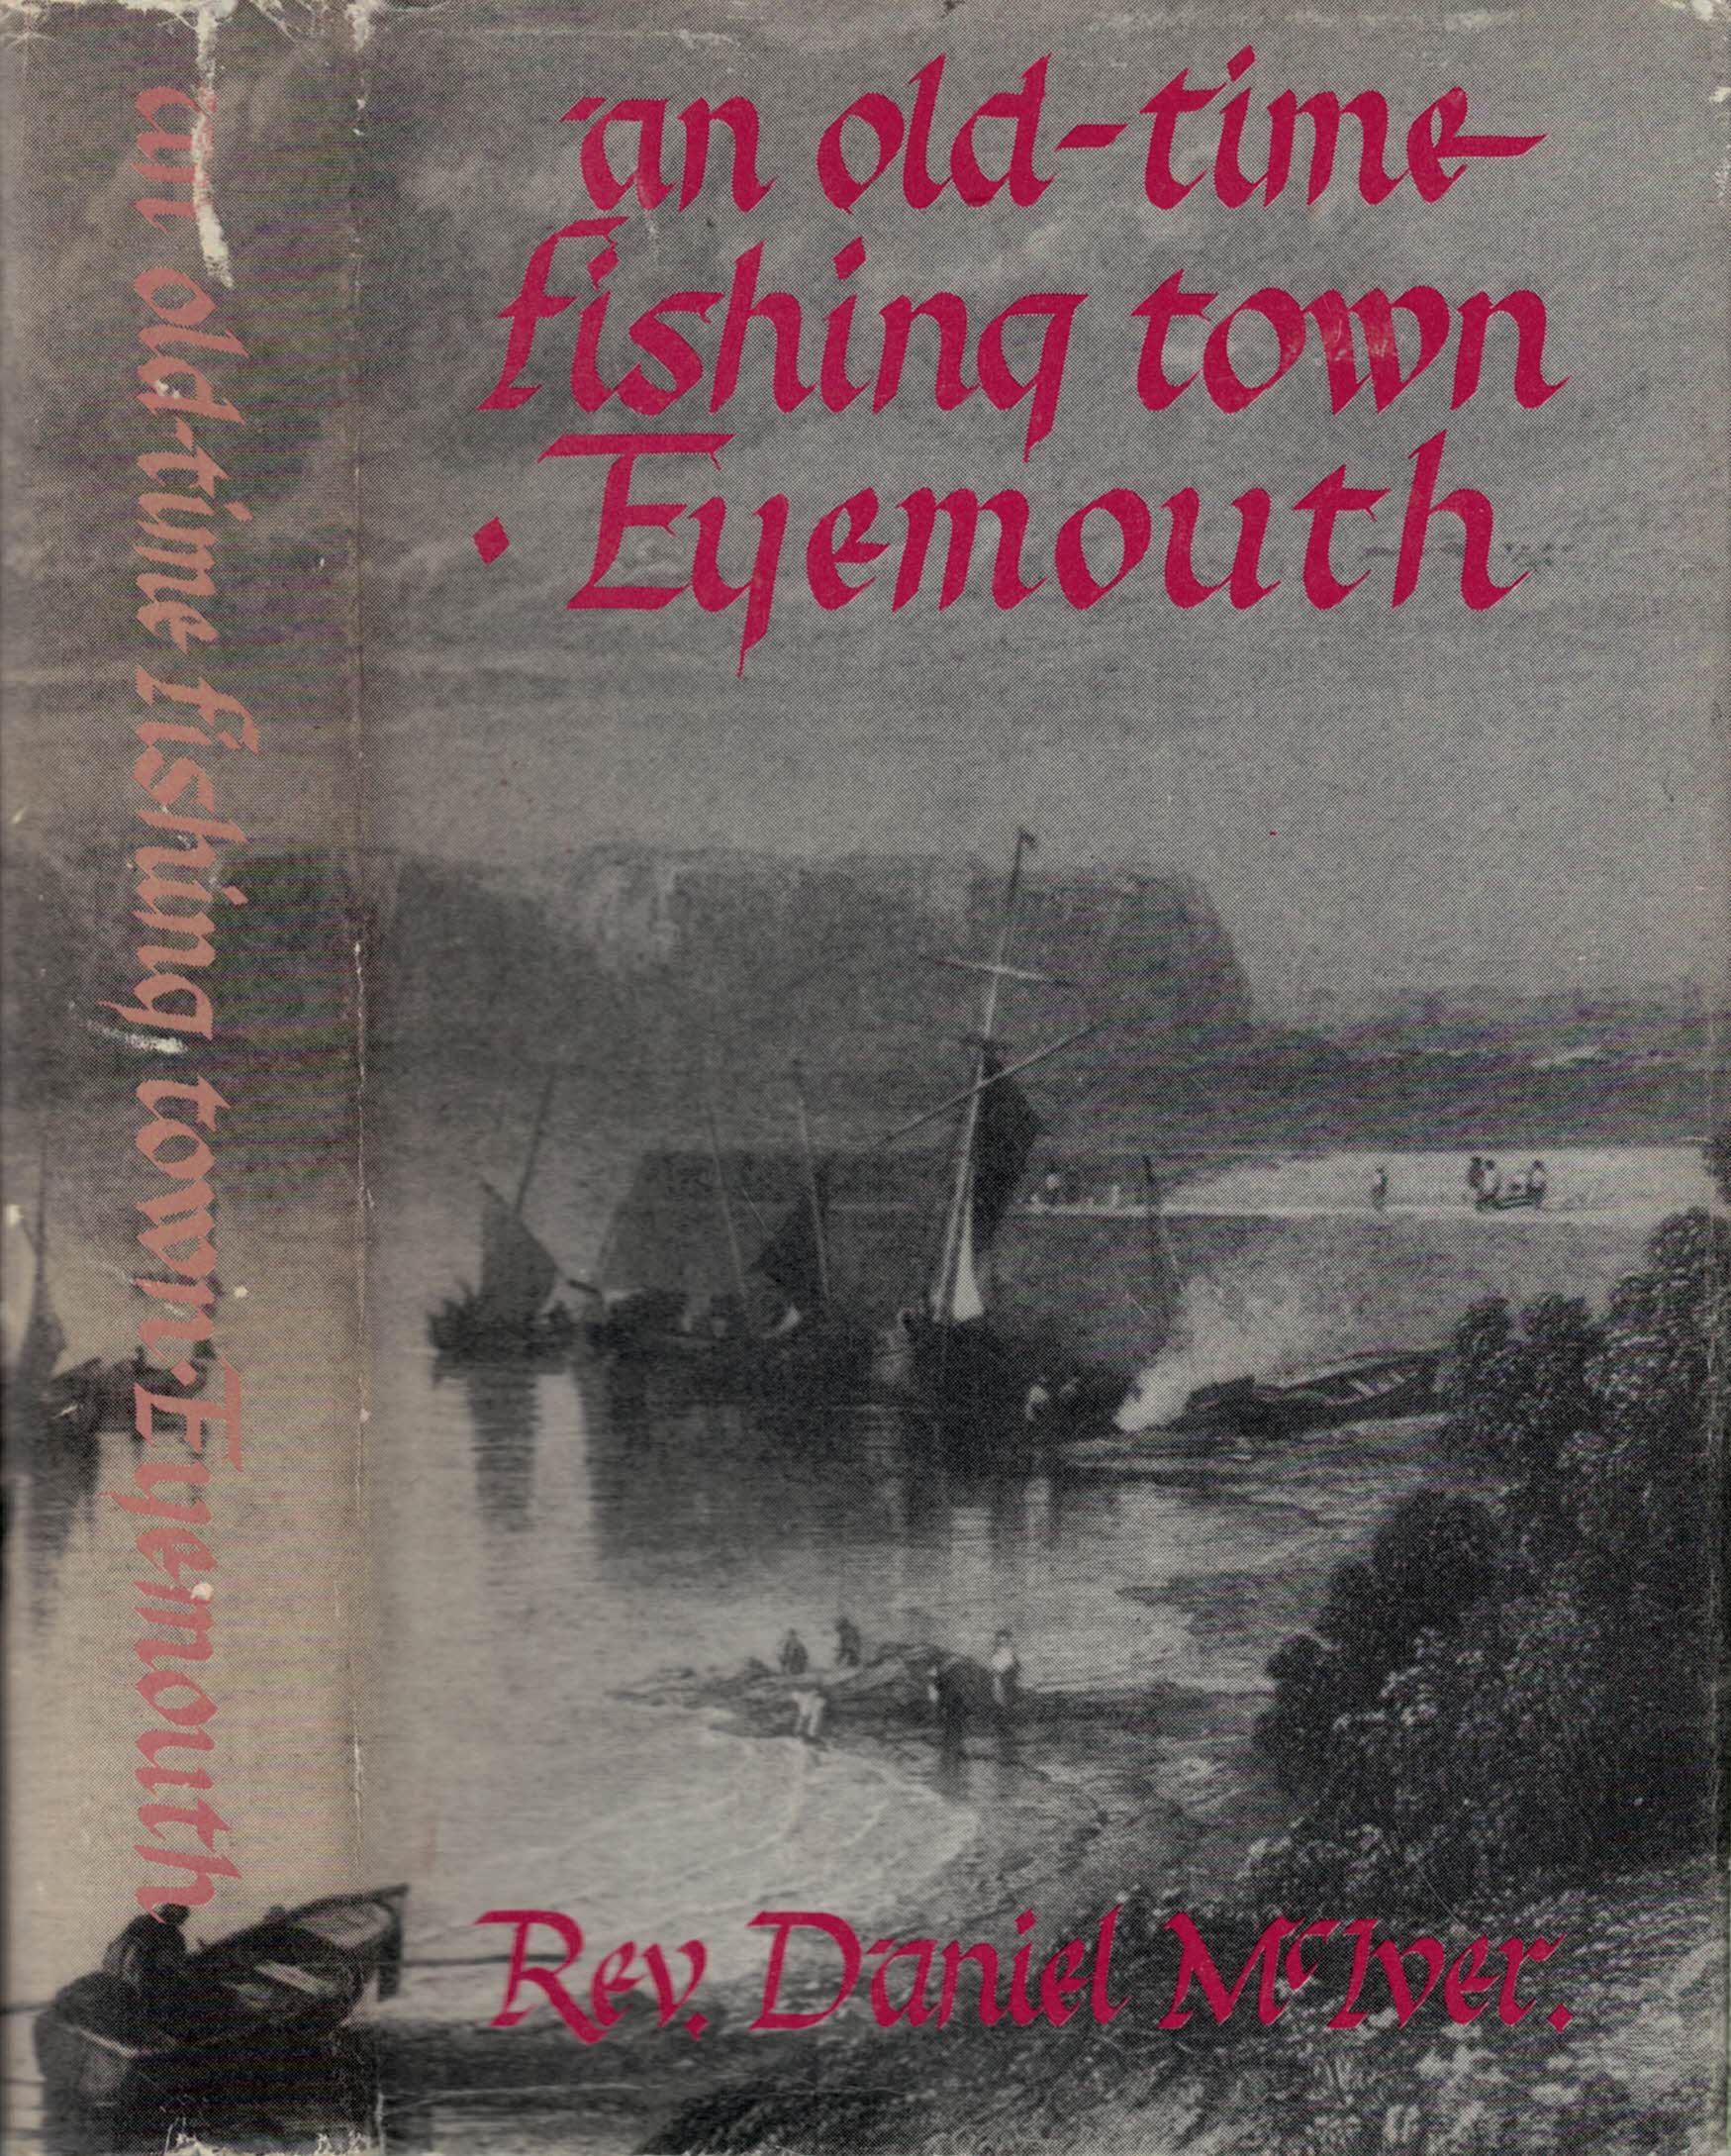 An Old-time Fishing Town: Eyemouth. Its History, Romance, And Tragedy. With An Account of the East Coast Disaster, 14th October 1881.